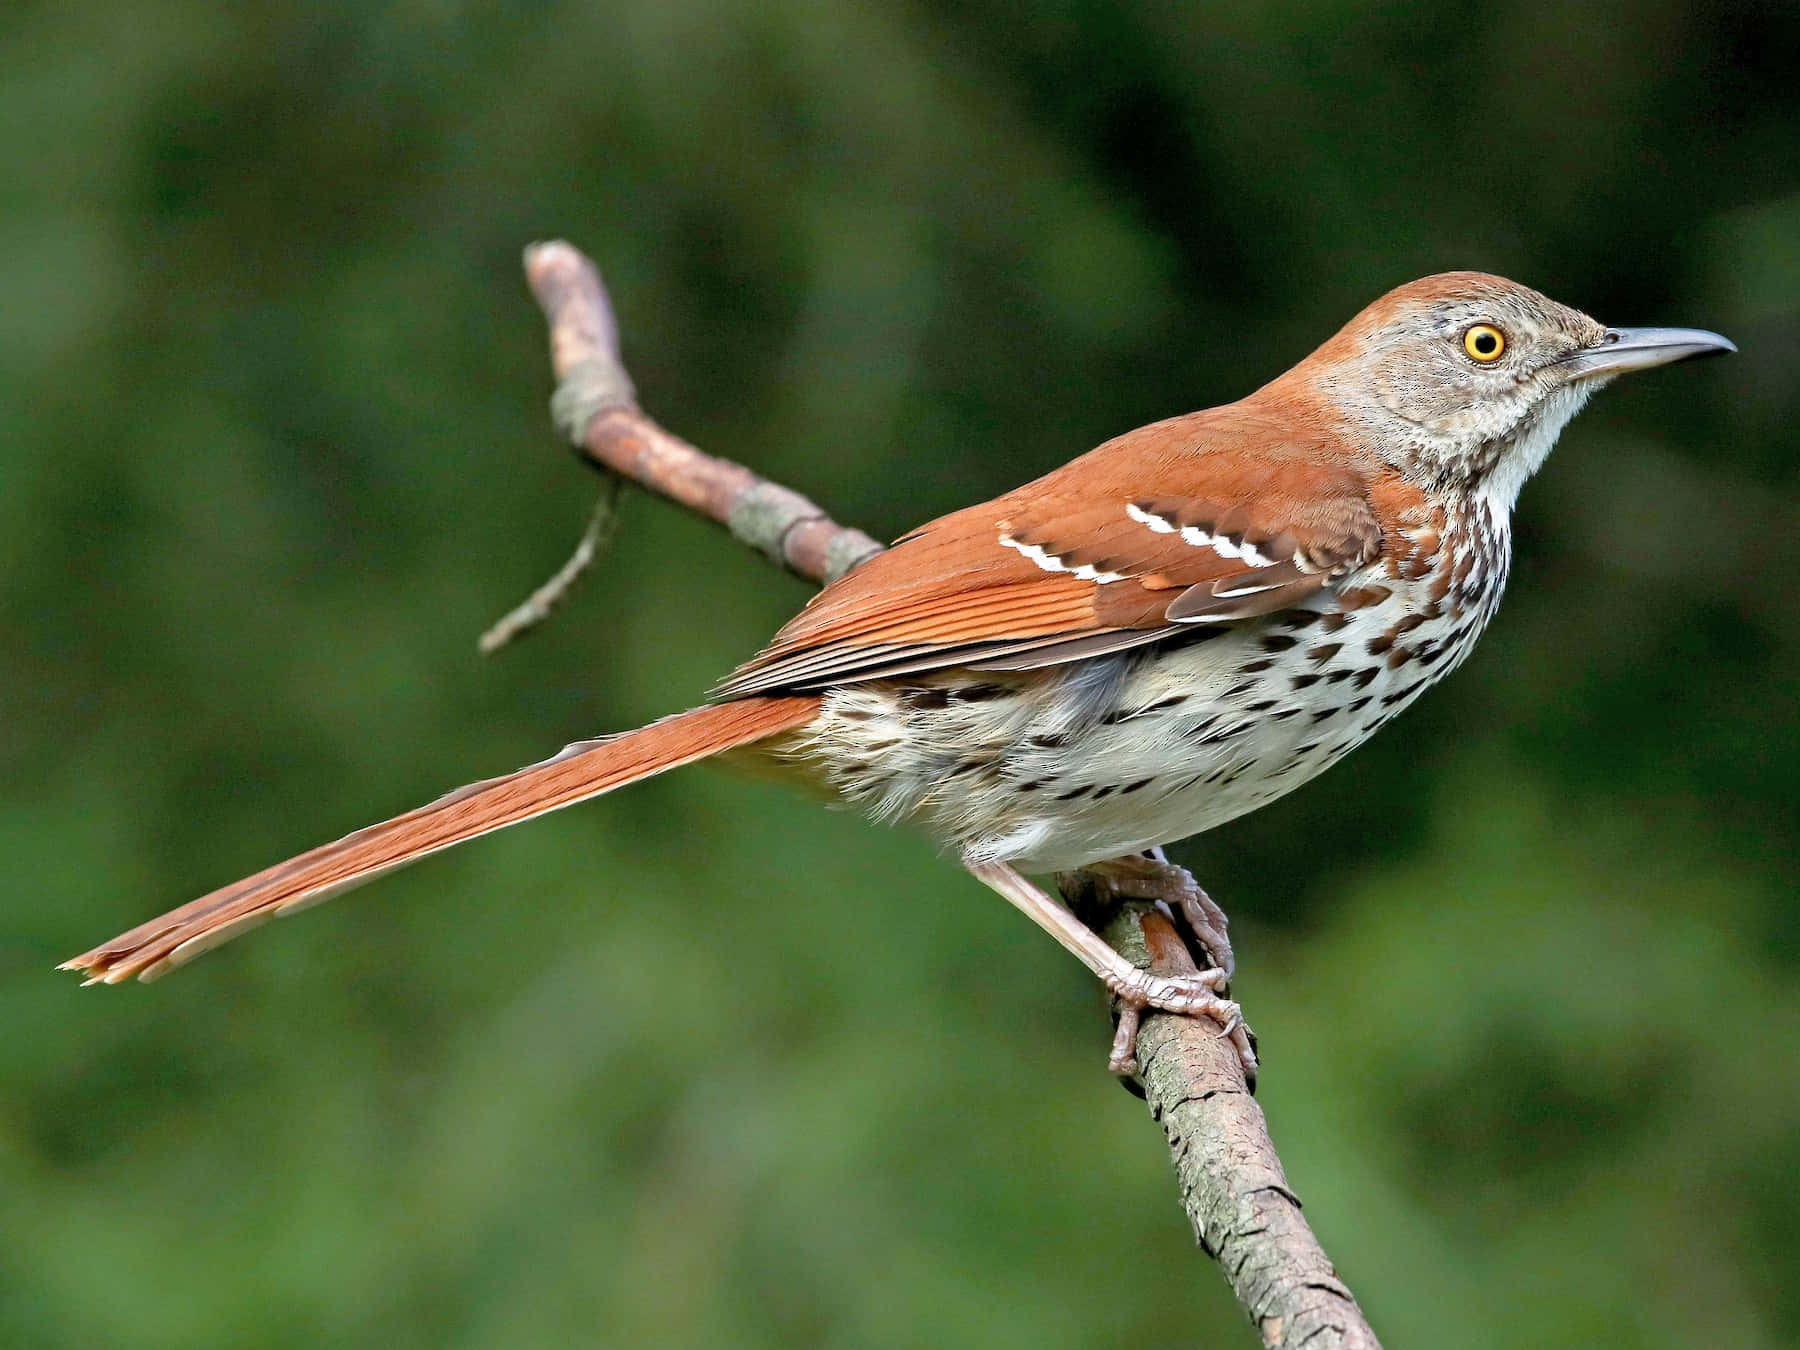 A Brown Thrasher bird perched on a branch Wallpaper